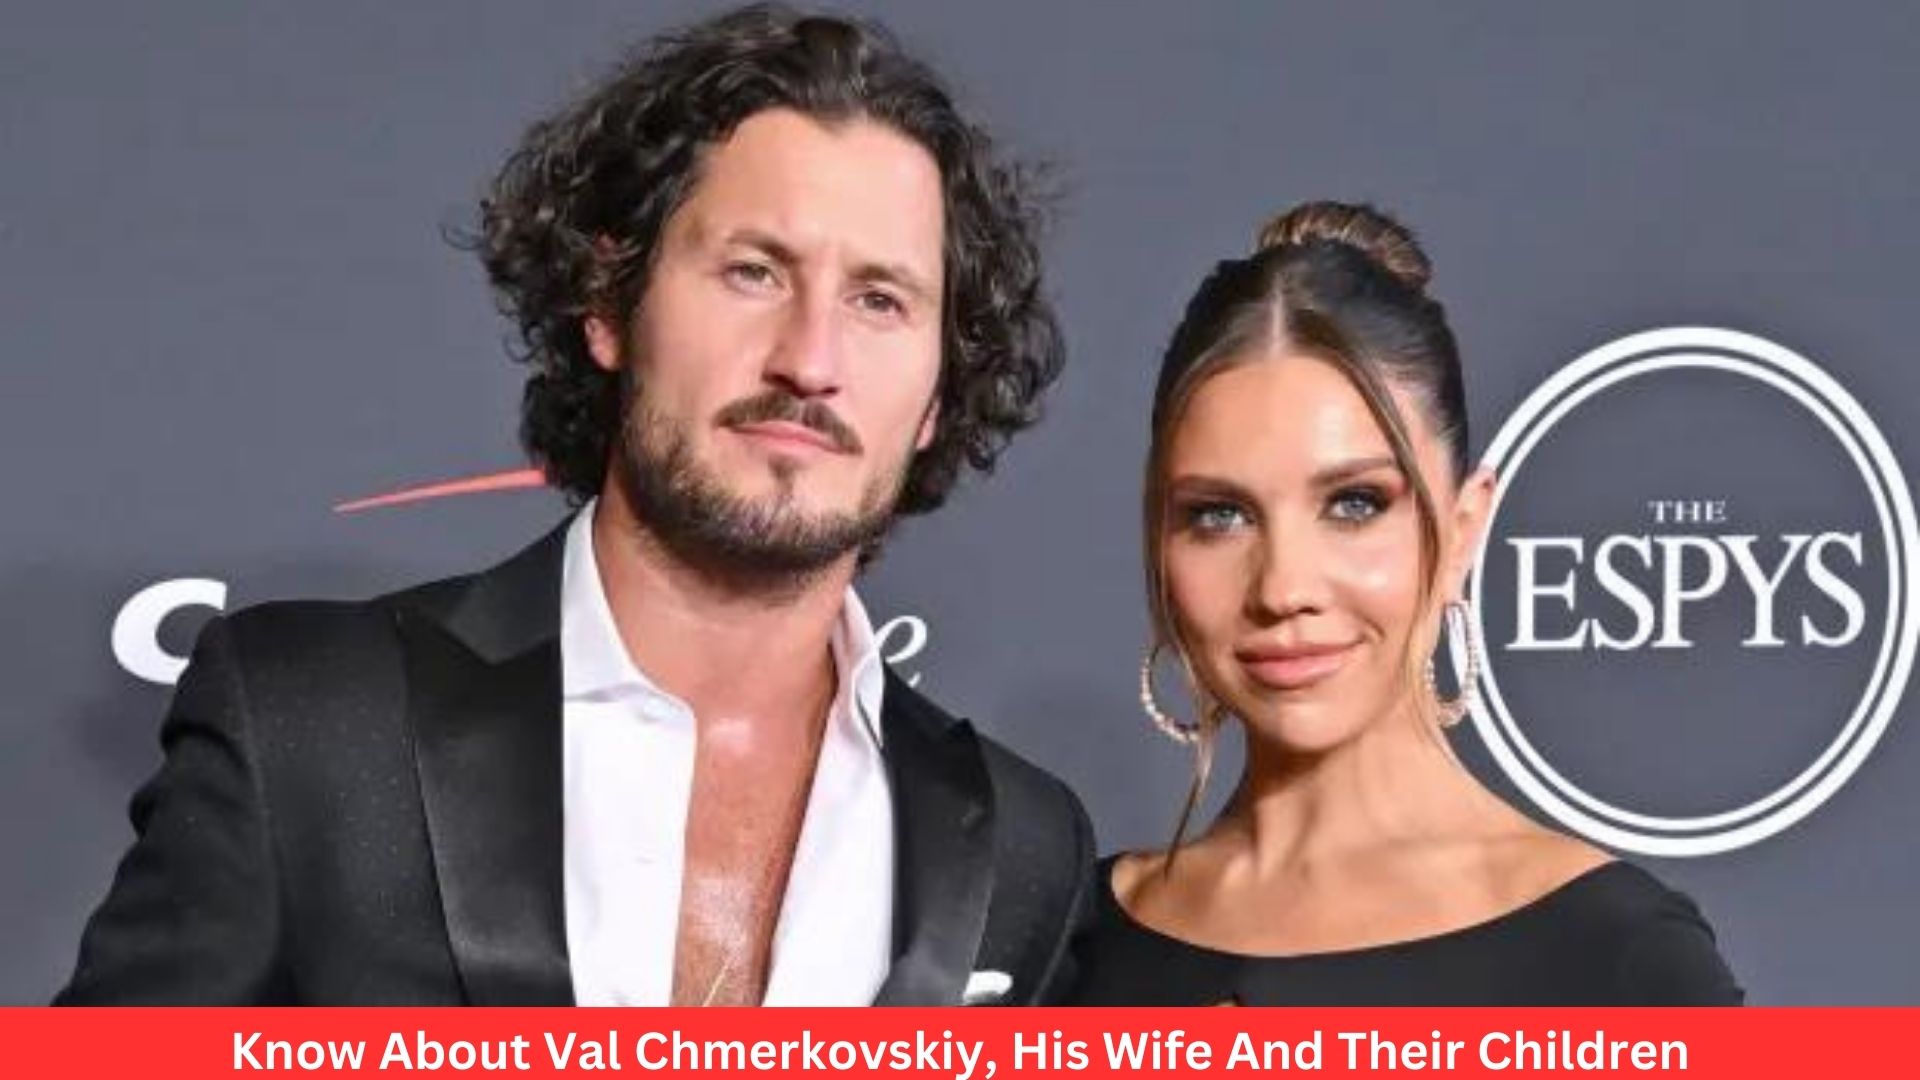 Know About Val Chmerkovskiy, His Wife And Their Children